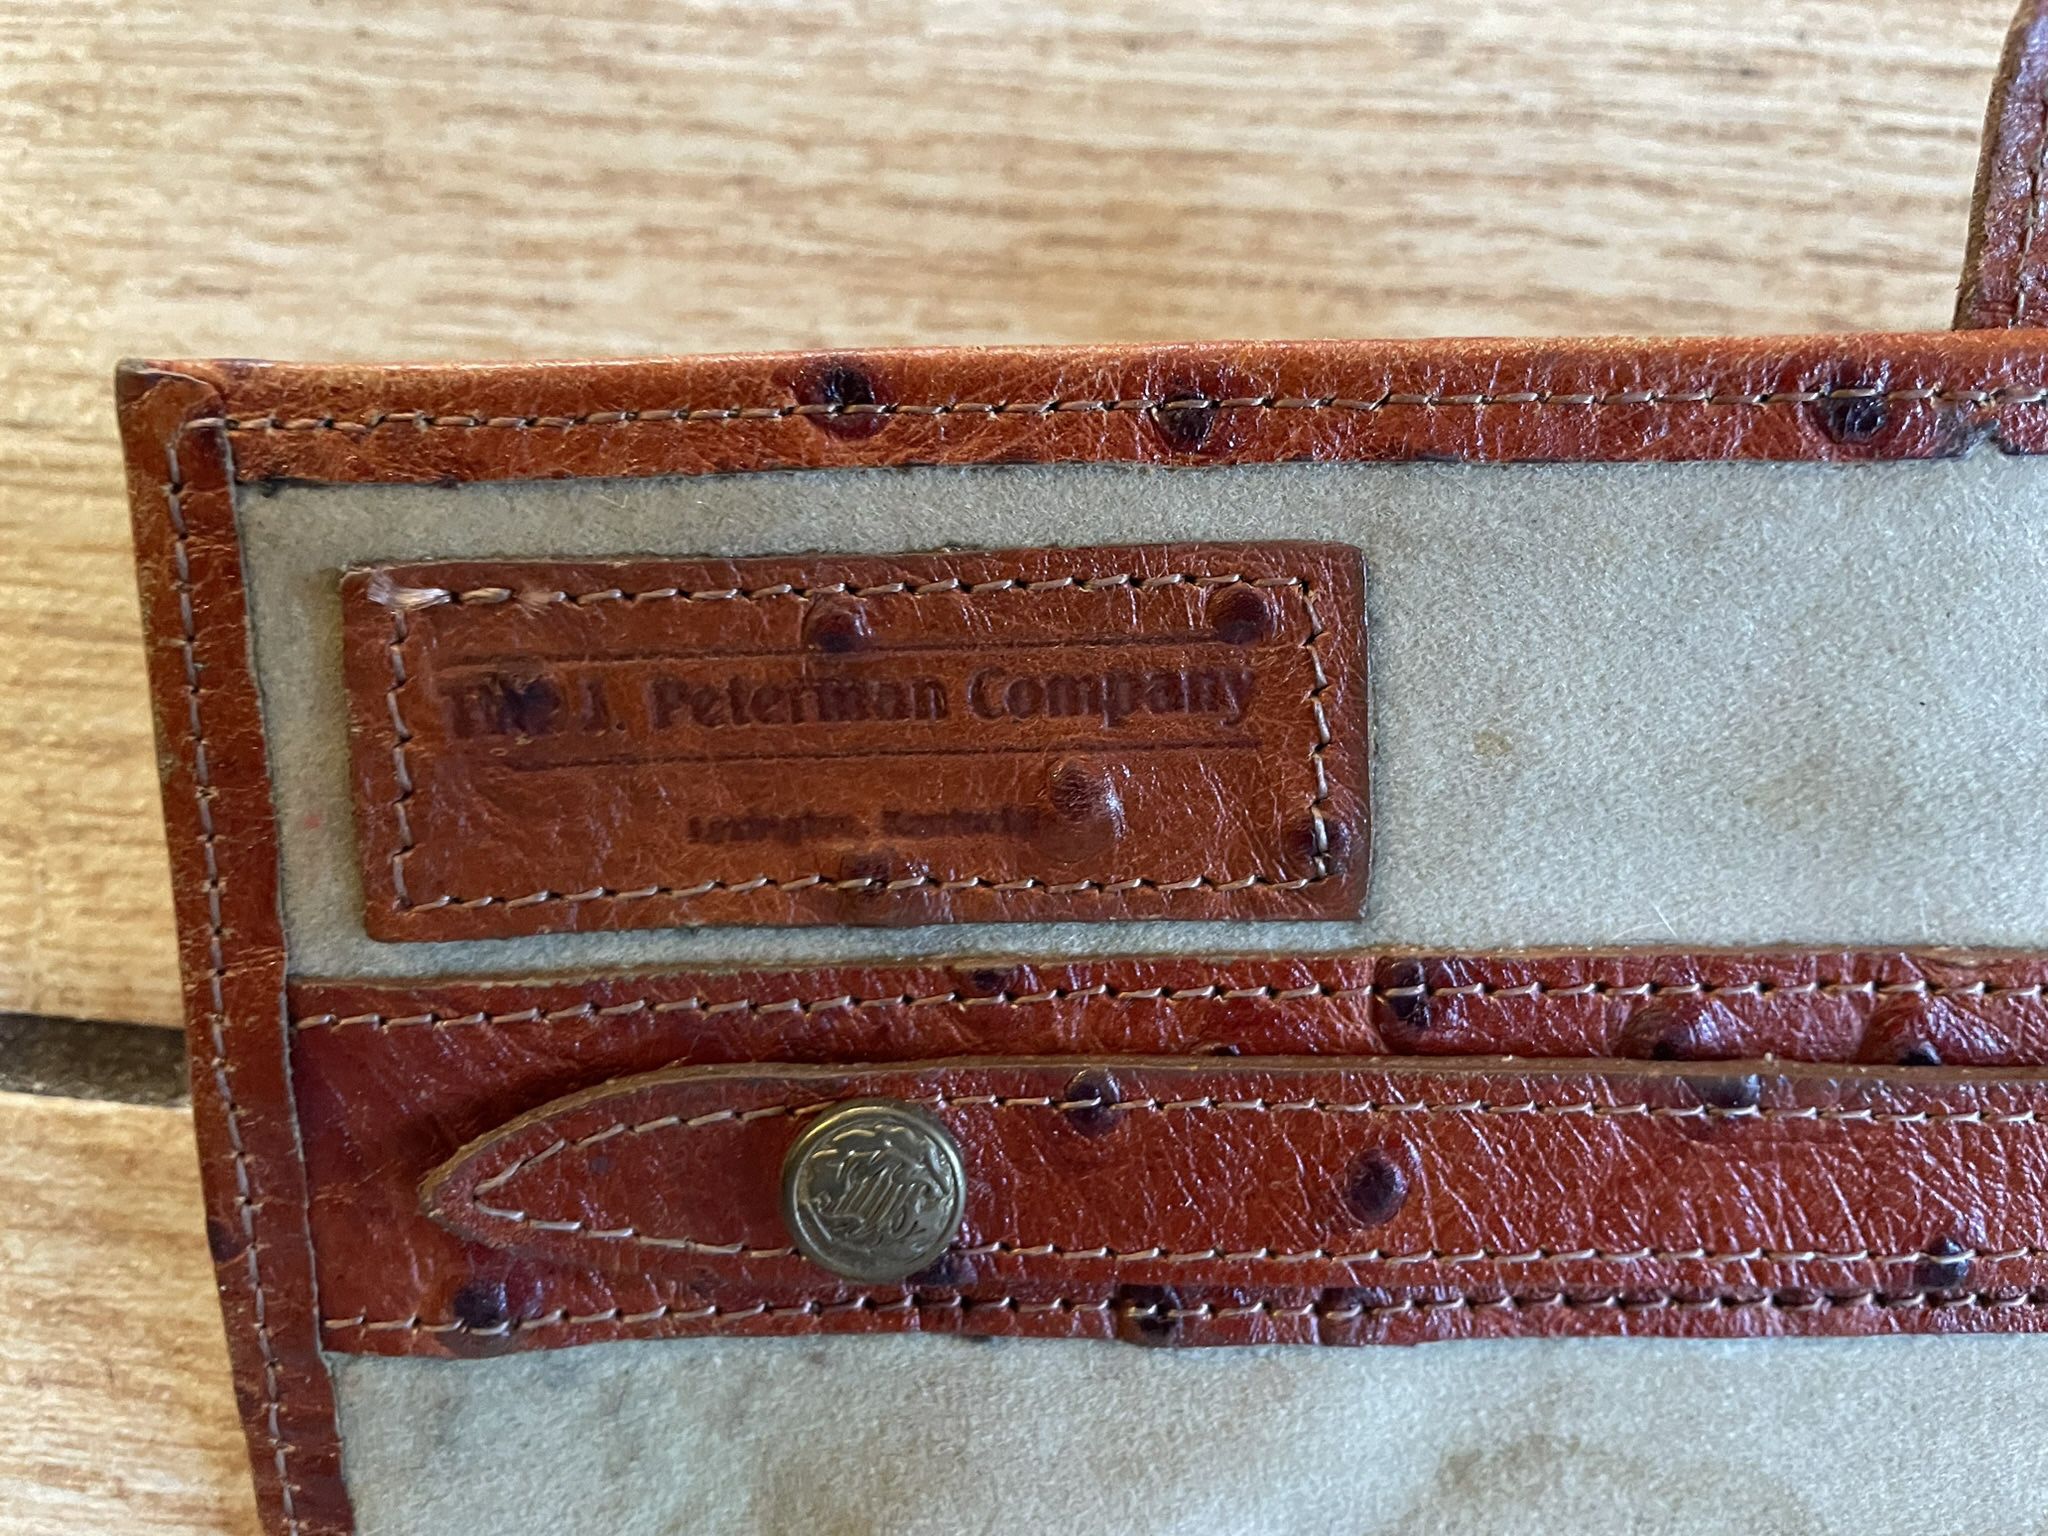 Peterman Co. Leather Wallet